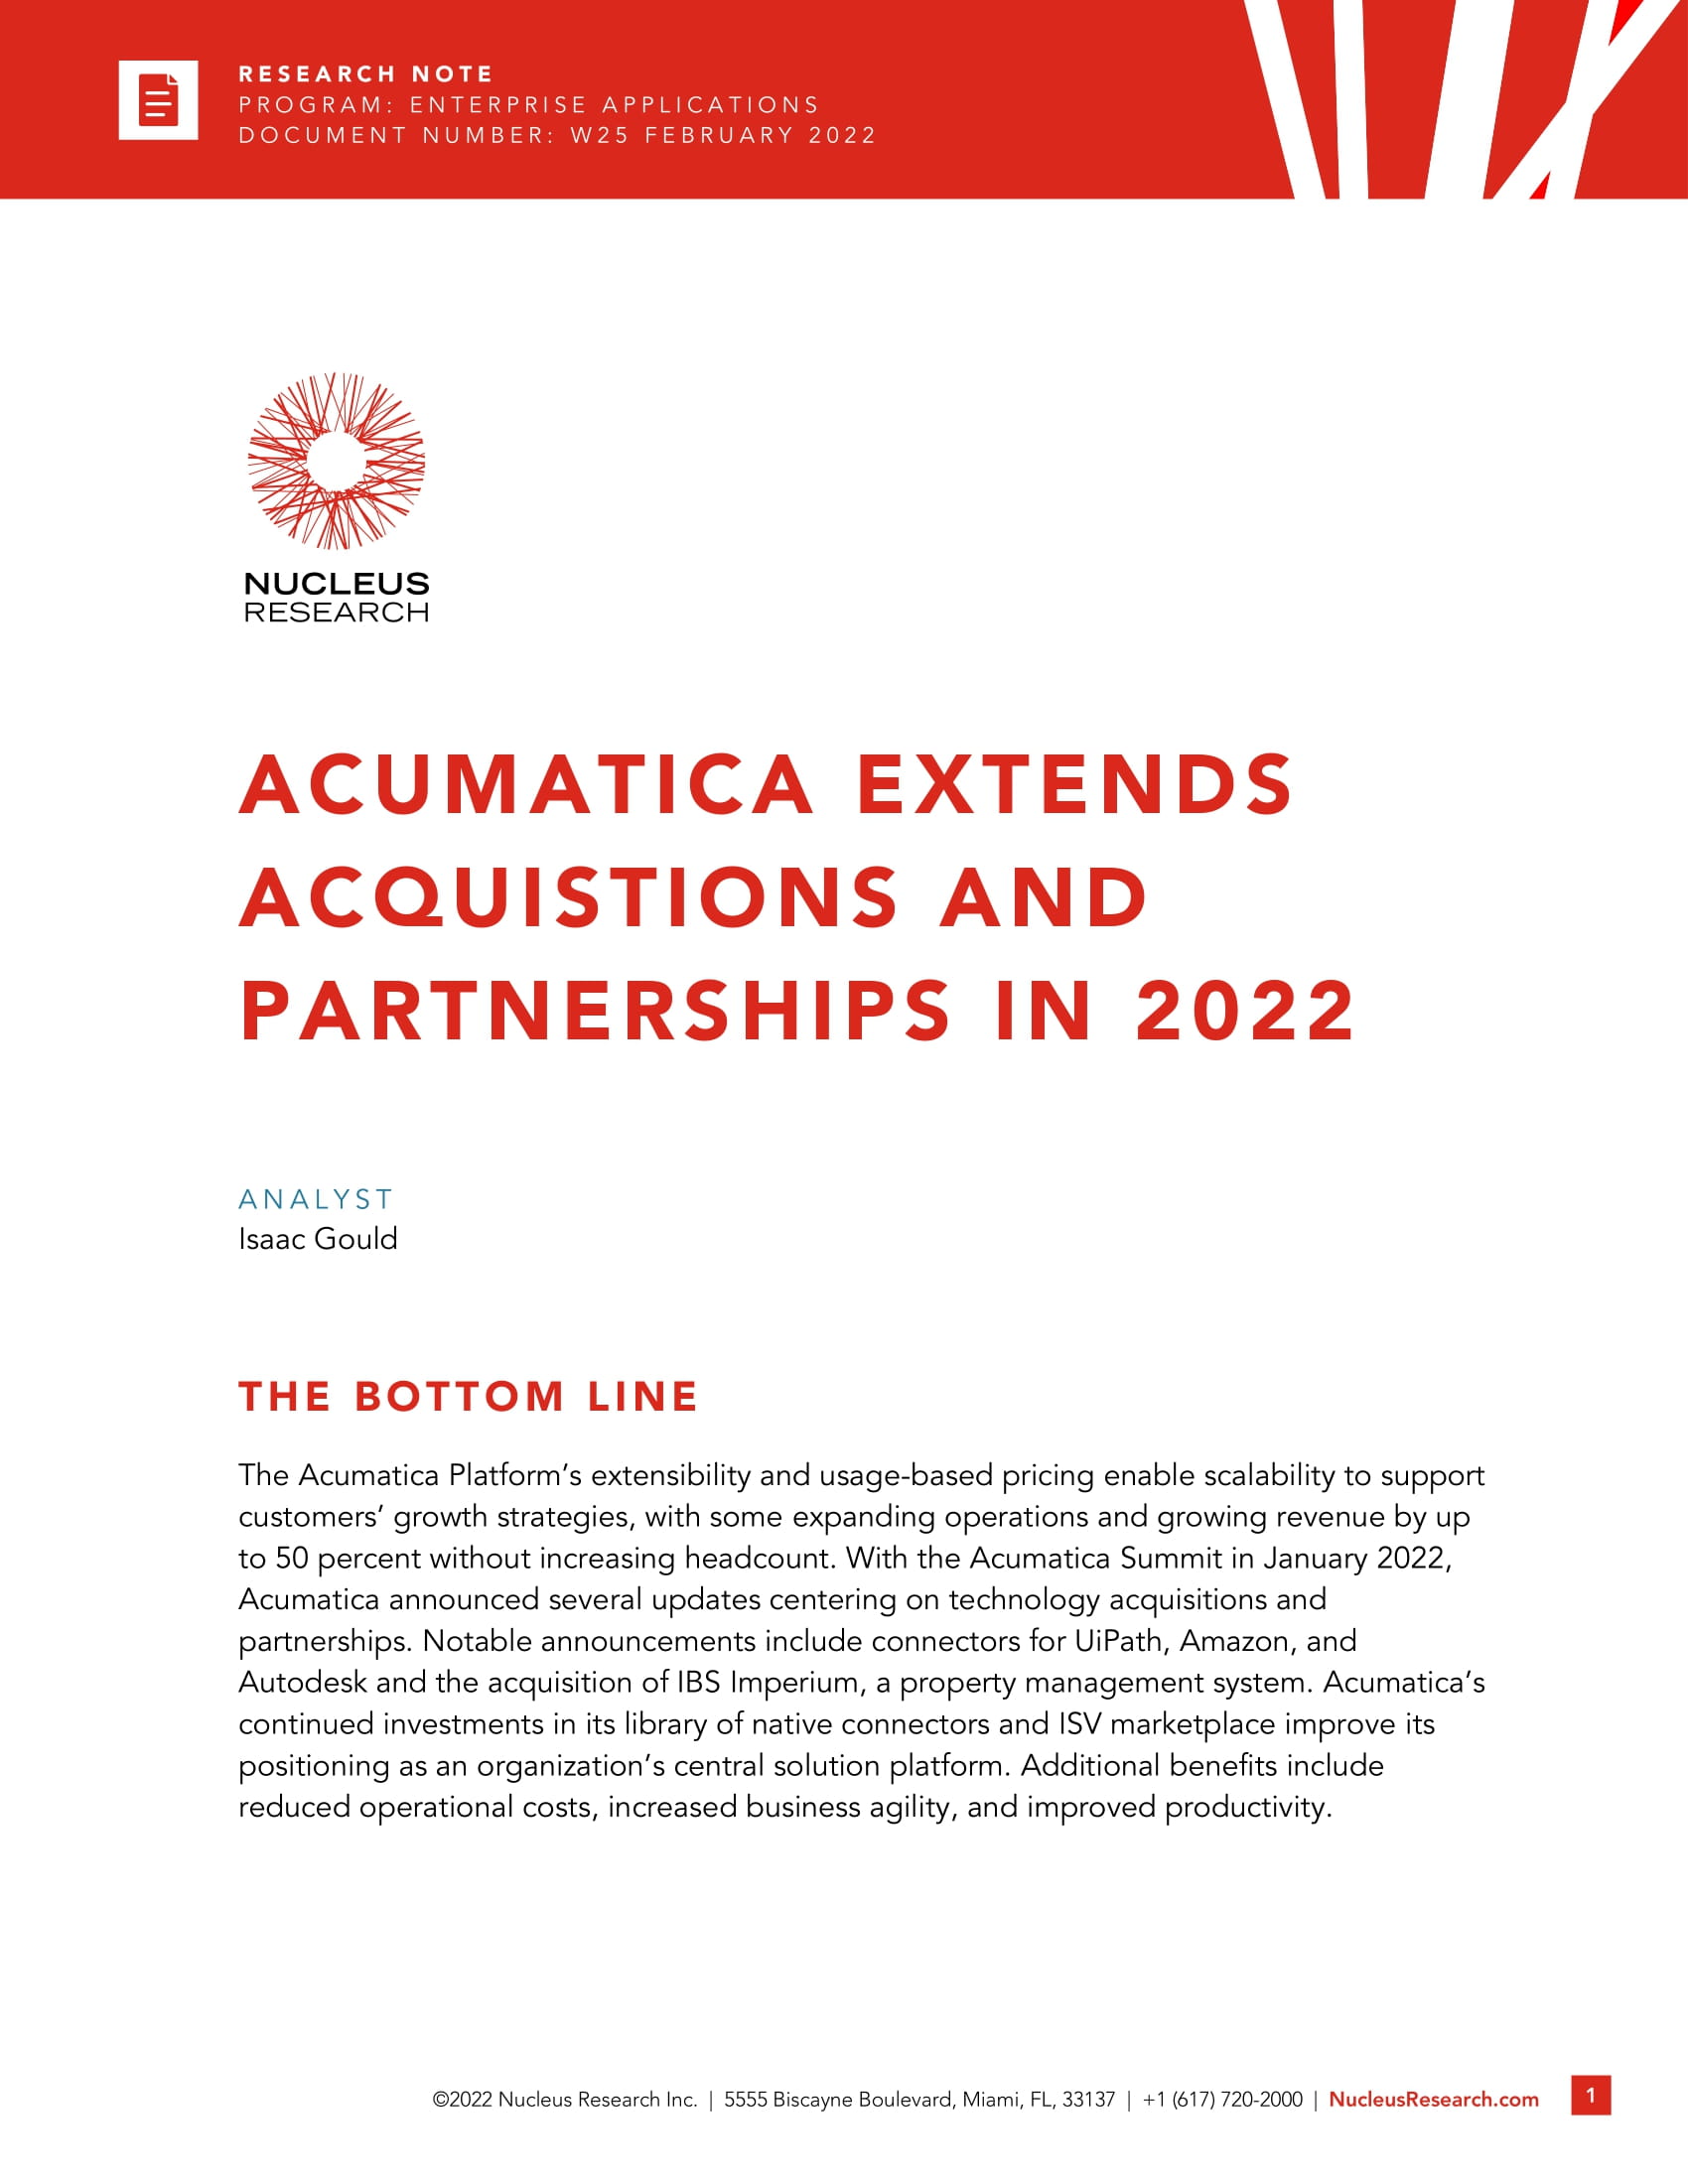 Leverage Acumatica’s New Acquisitions and Partnerships 